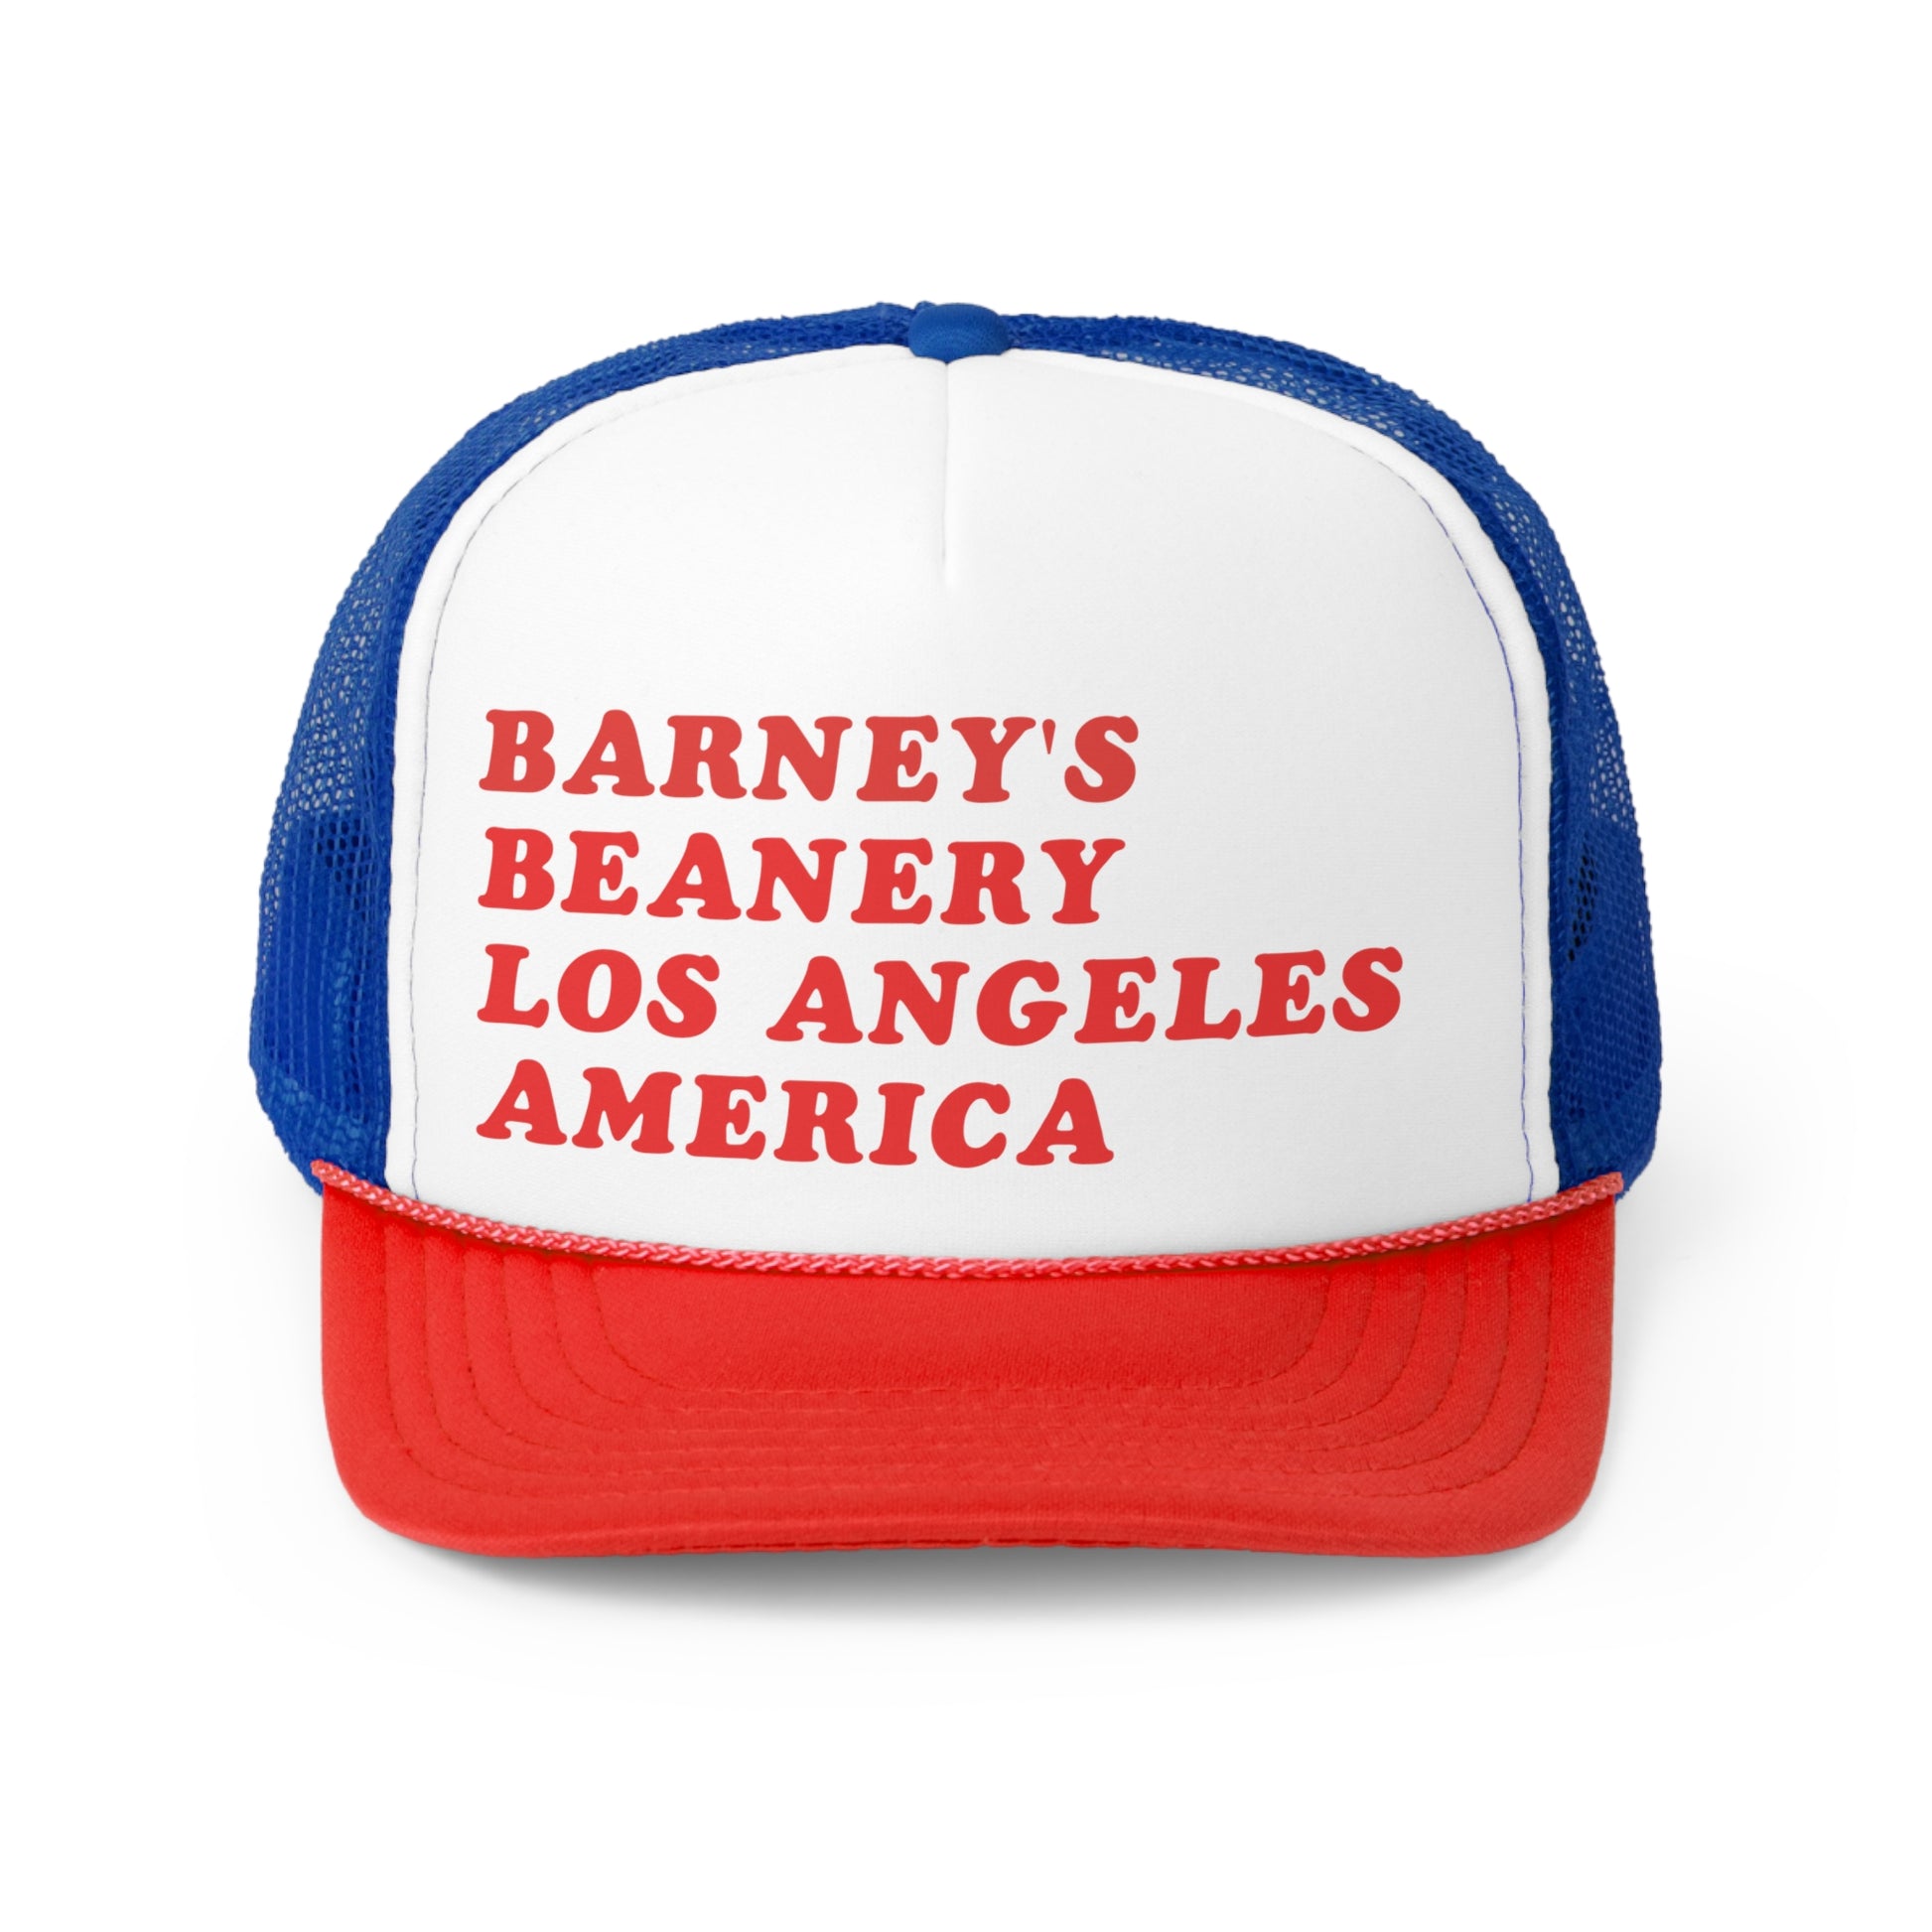 Los Angeles, America | BARNEY'S BEANERY - Trucker Hat | Red Graphic On Red, White And Blue Trucker Hat, Front View